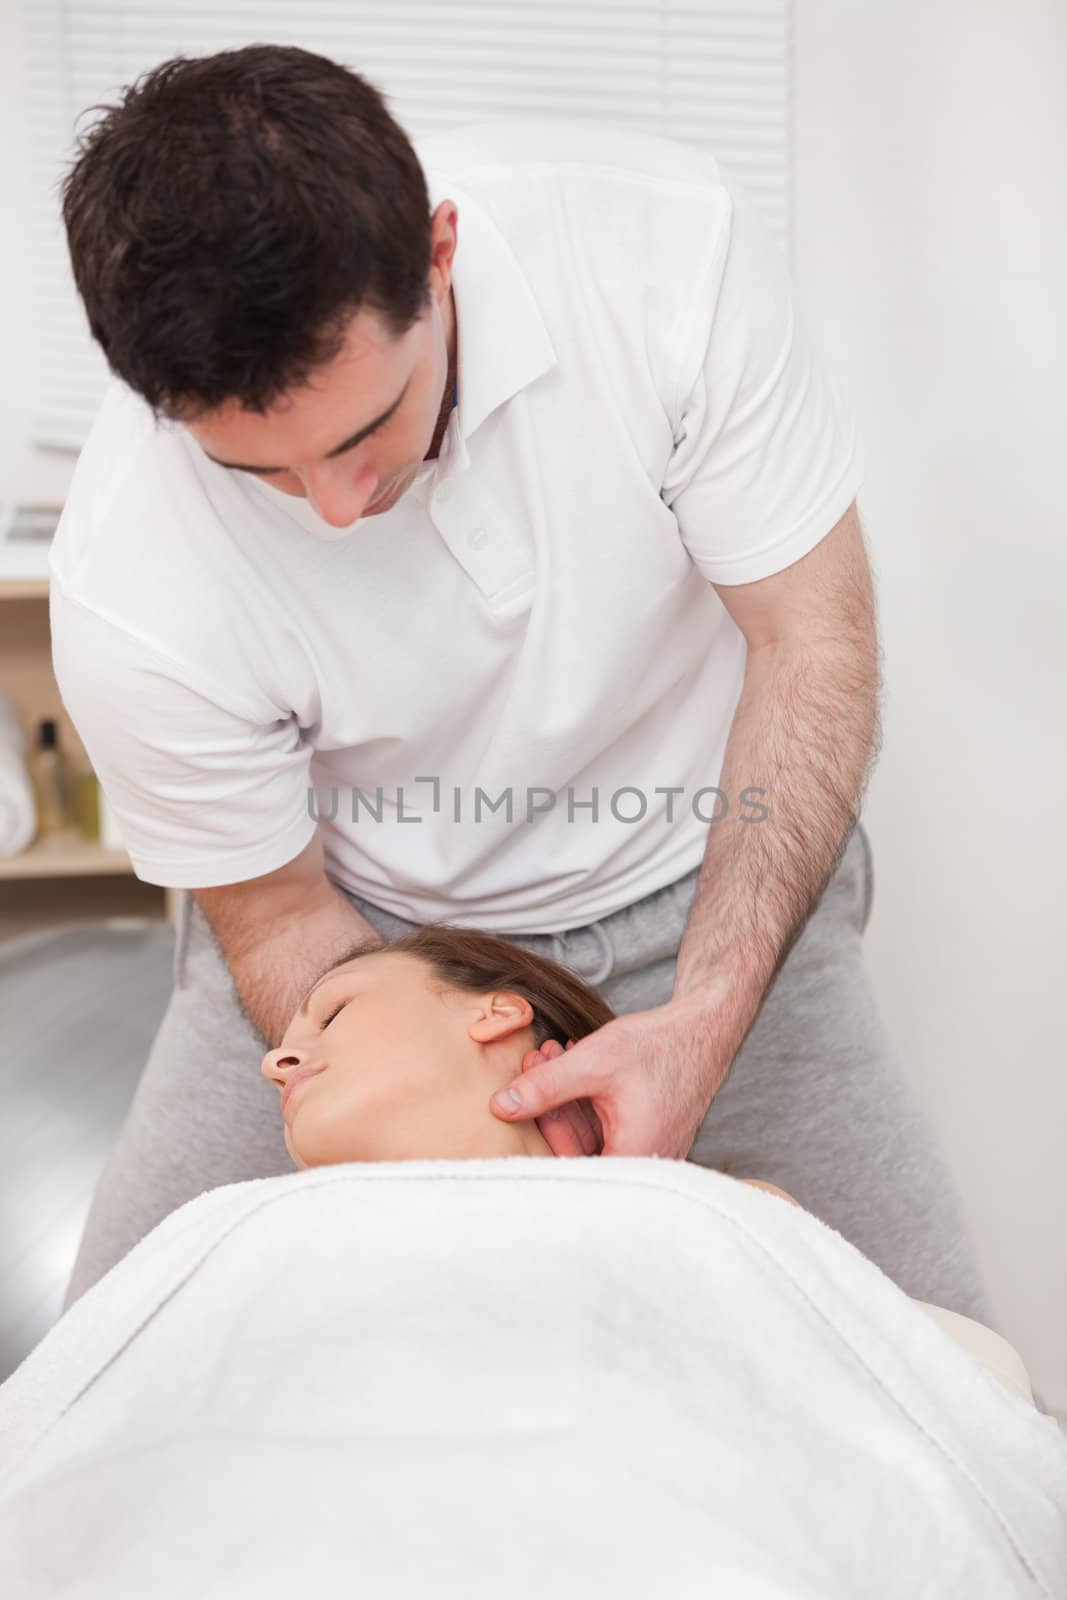 Therapist manipulating the neck of his patient while standing in a room